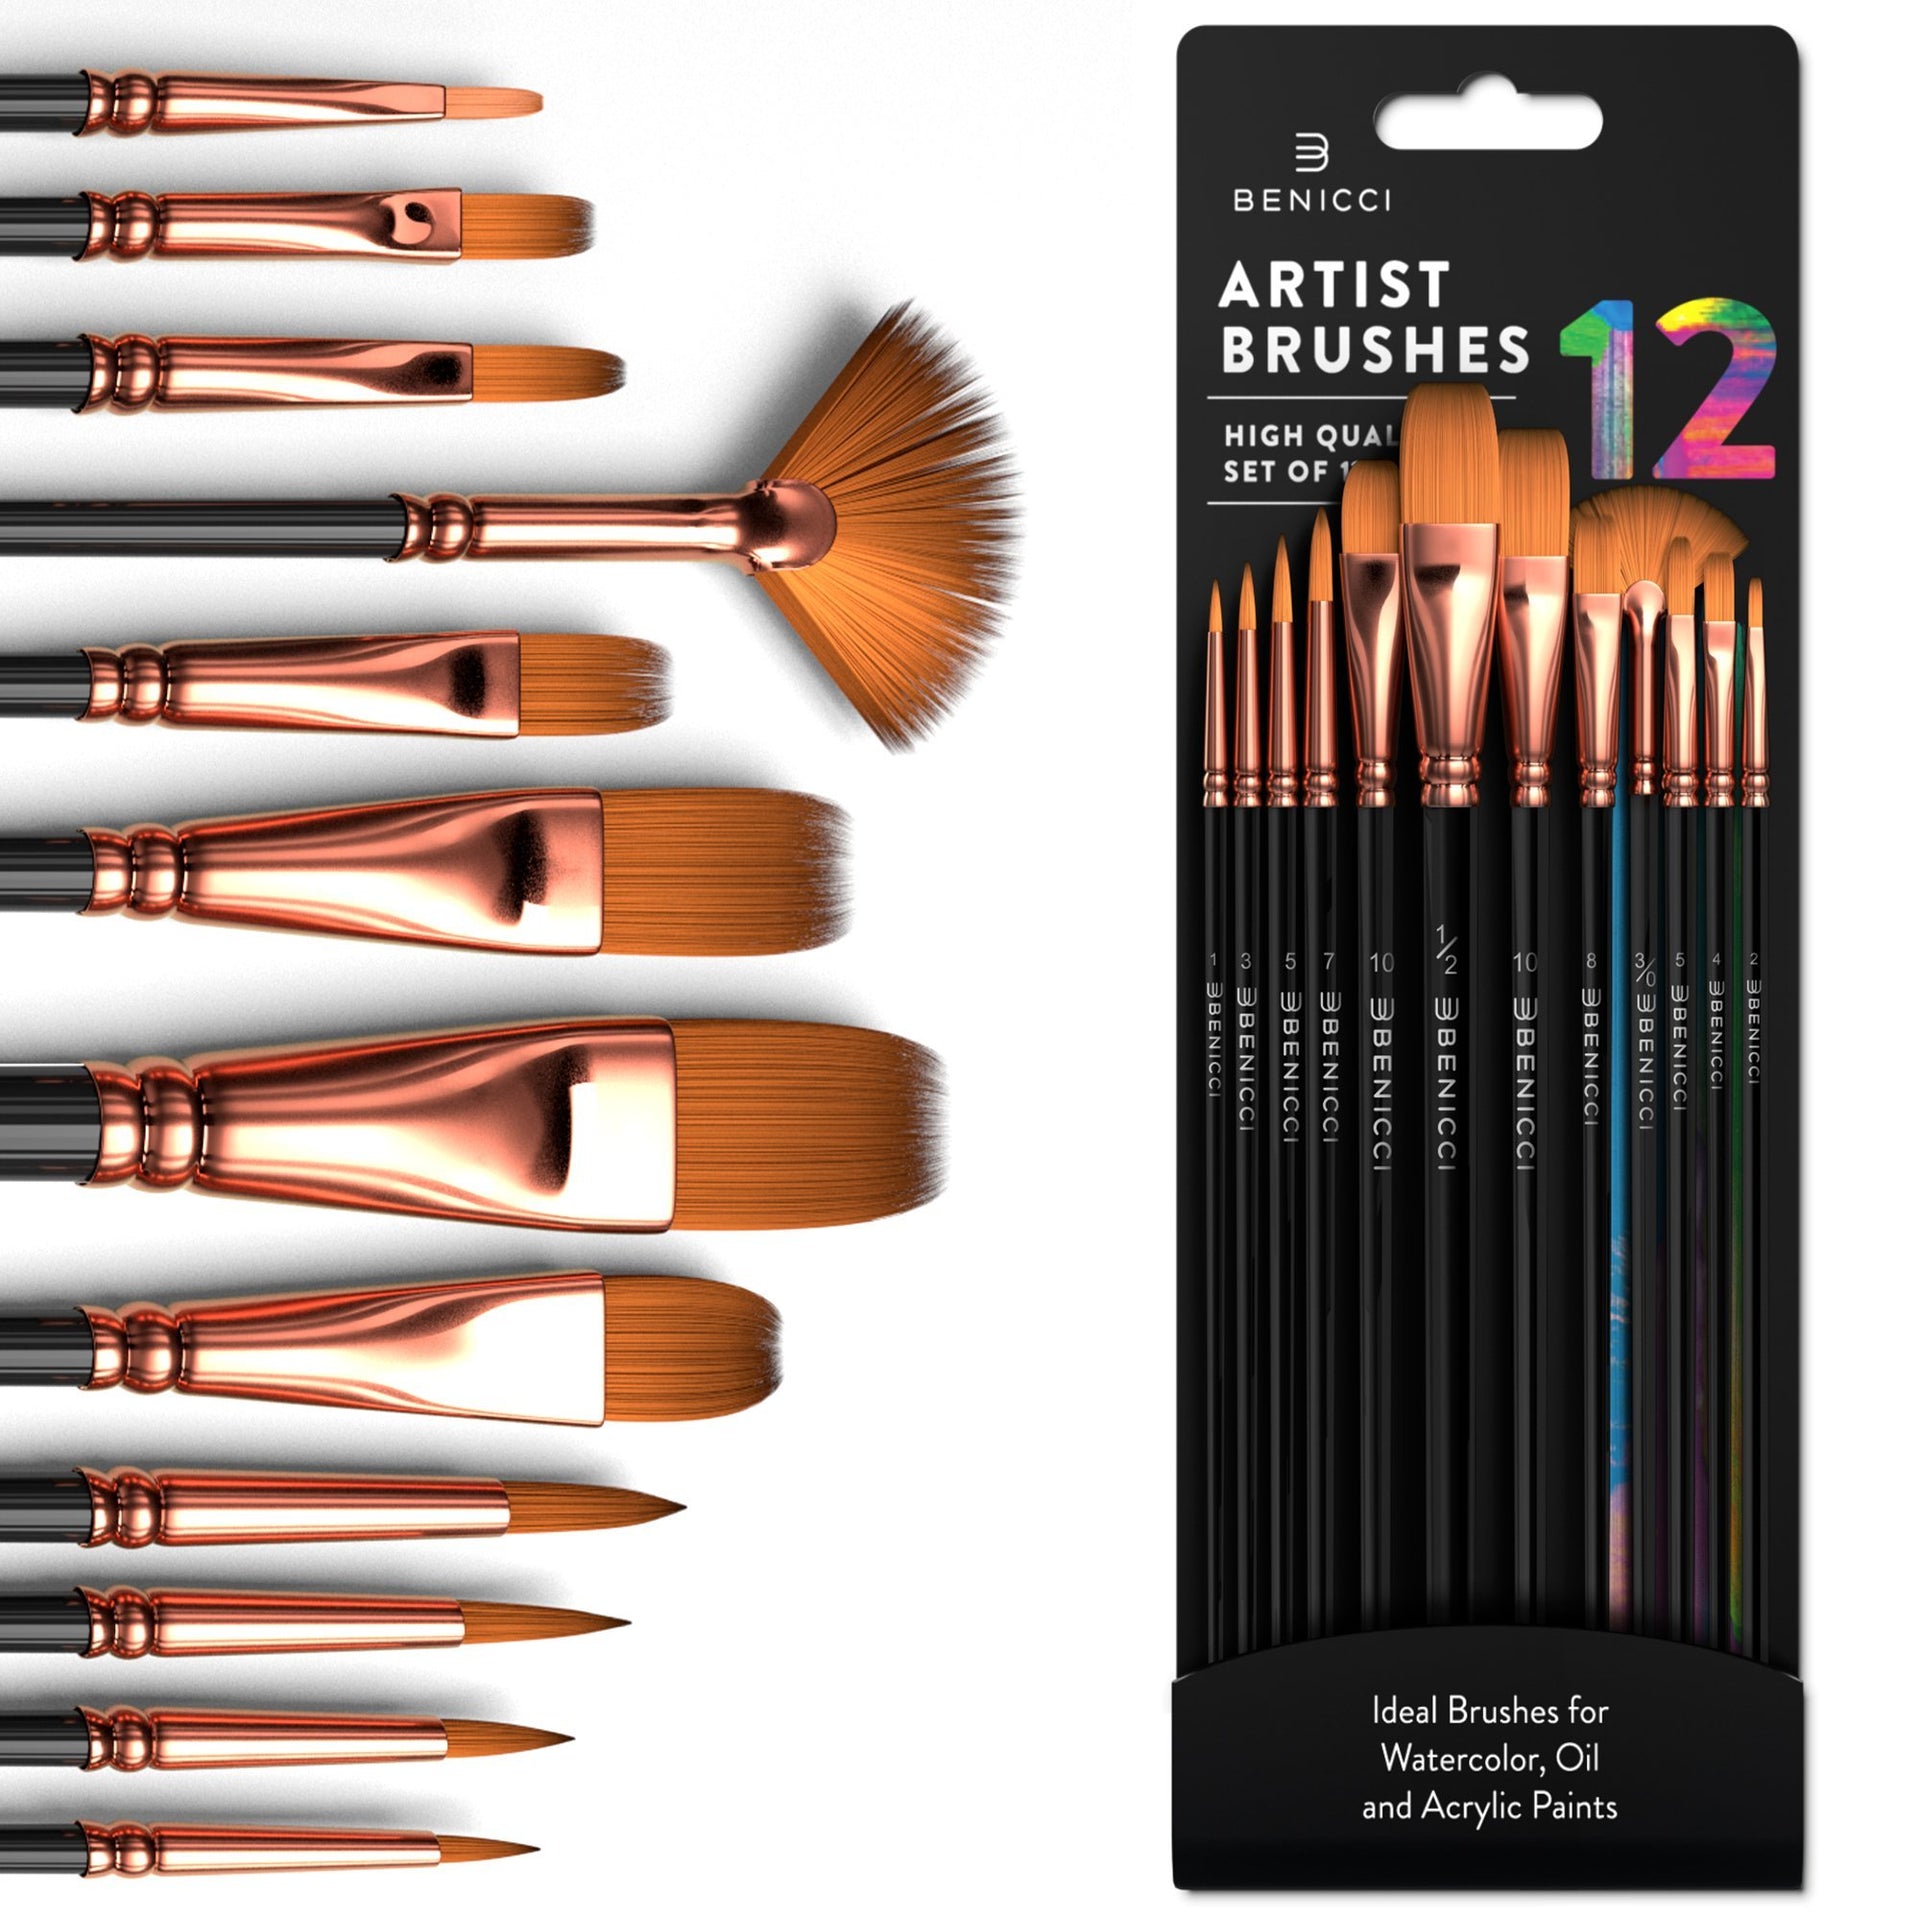 Paint Brush Set with Wood Handles, 4 Piece - ECO Quality